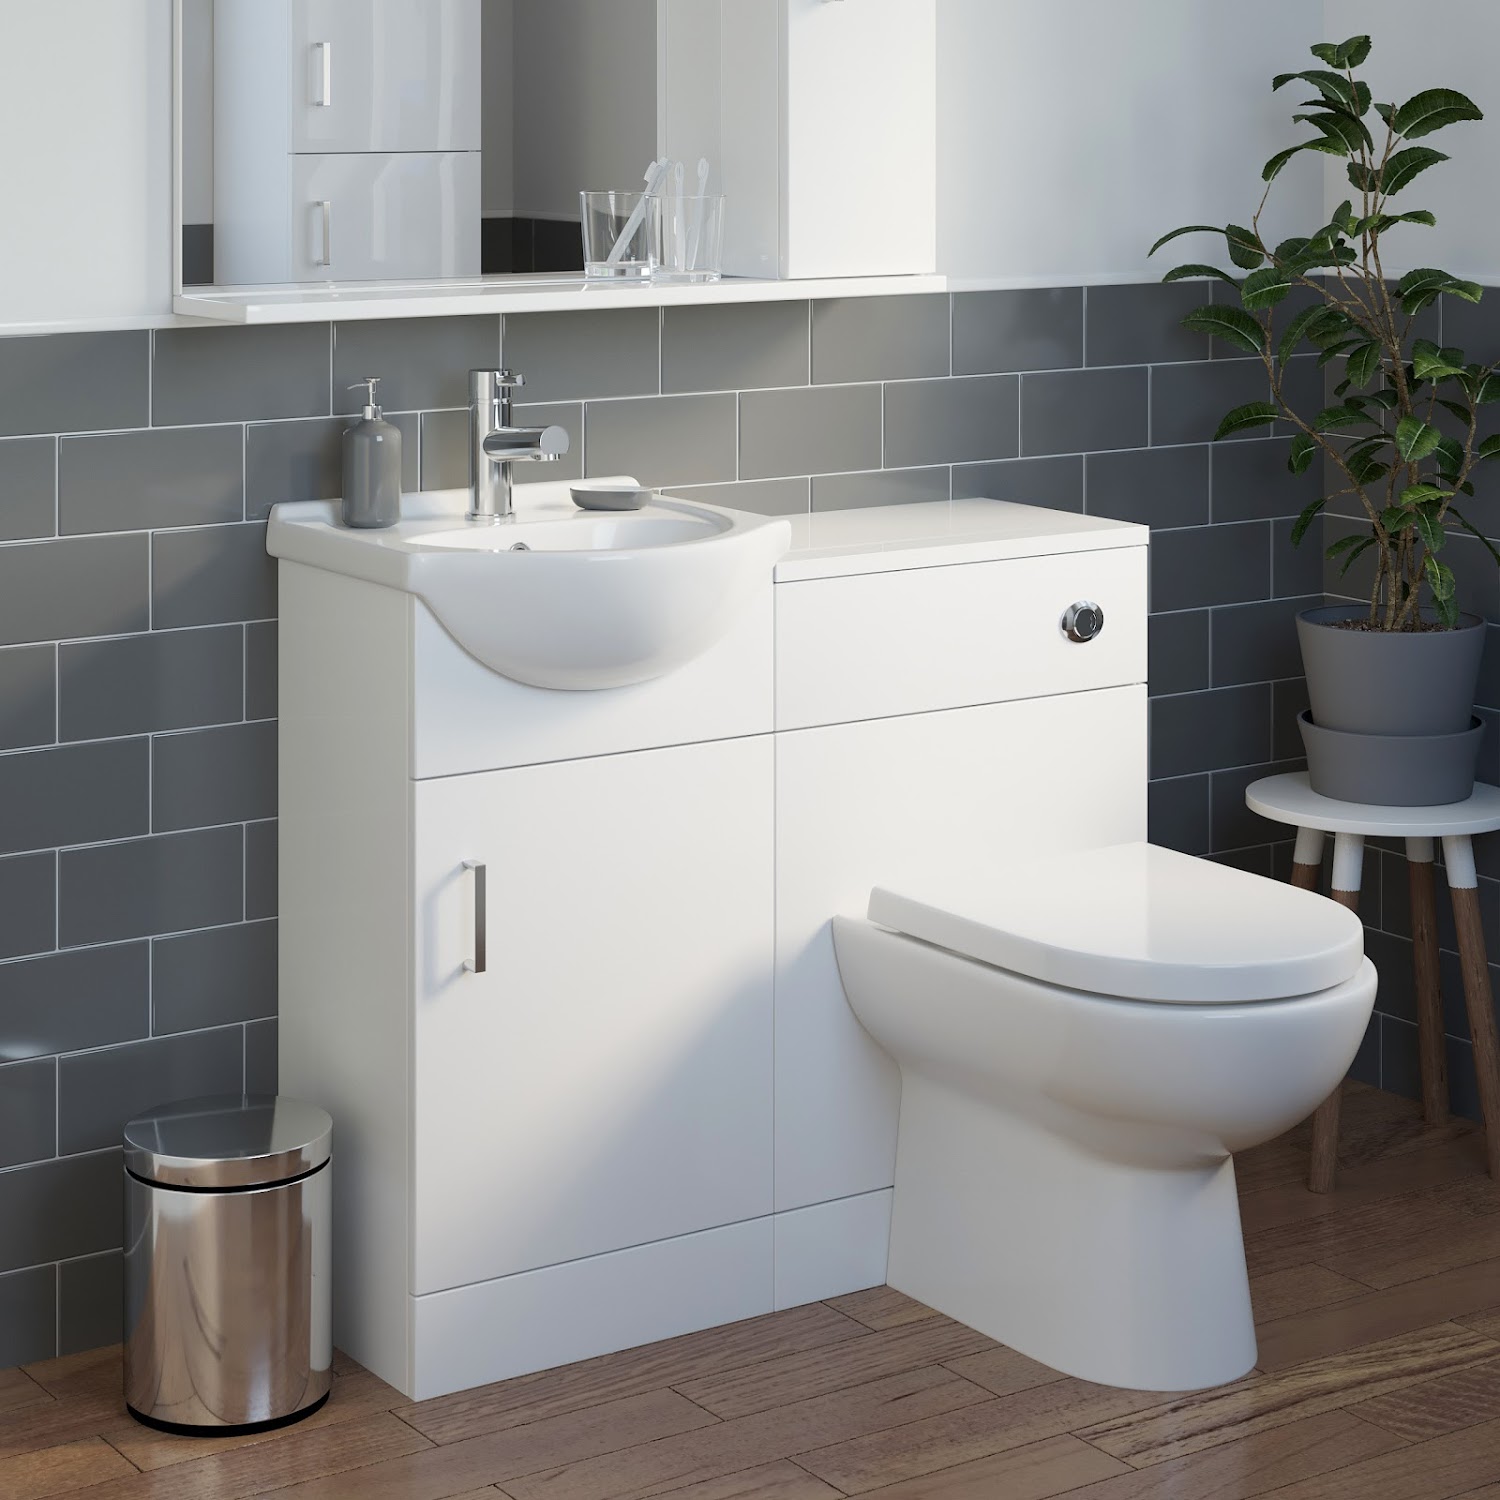 950mm Toilet and Bathroom Vanity Unit Combined Basin Sink Furniture